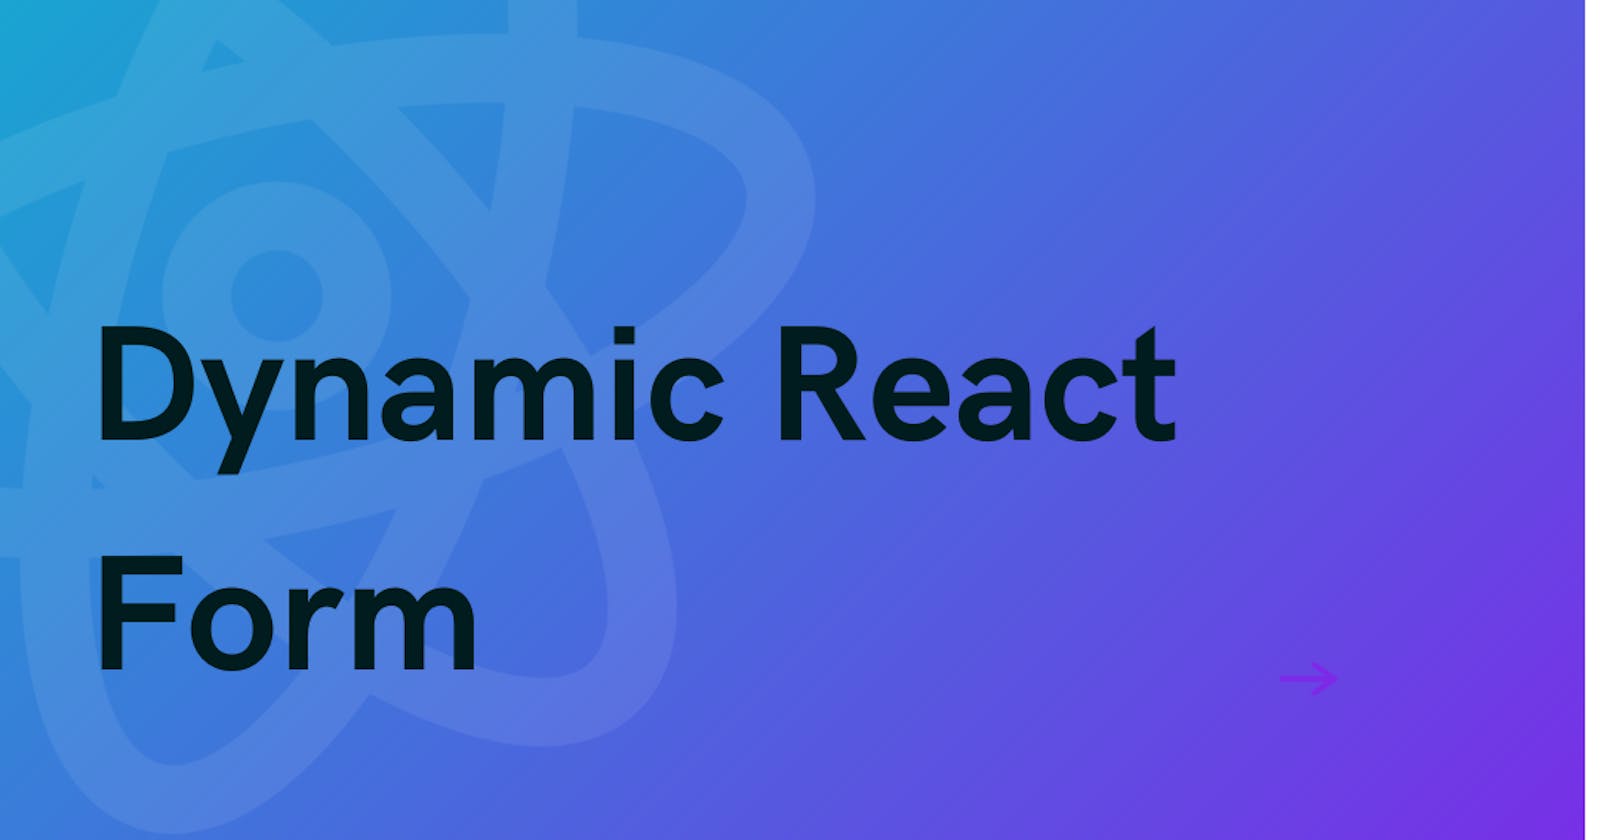 A step-by-step tutorial on creating a dynamic registration form using React, Tailwind CSS, and React Hook Form.